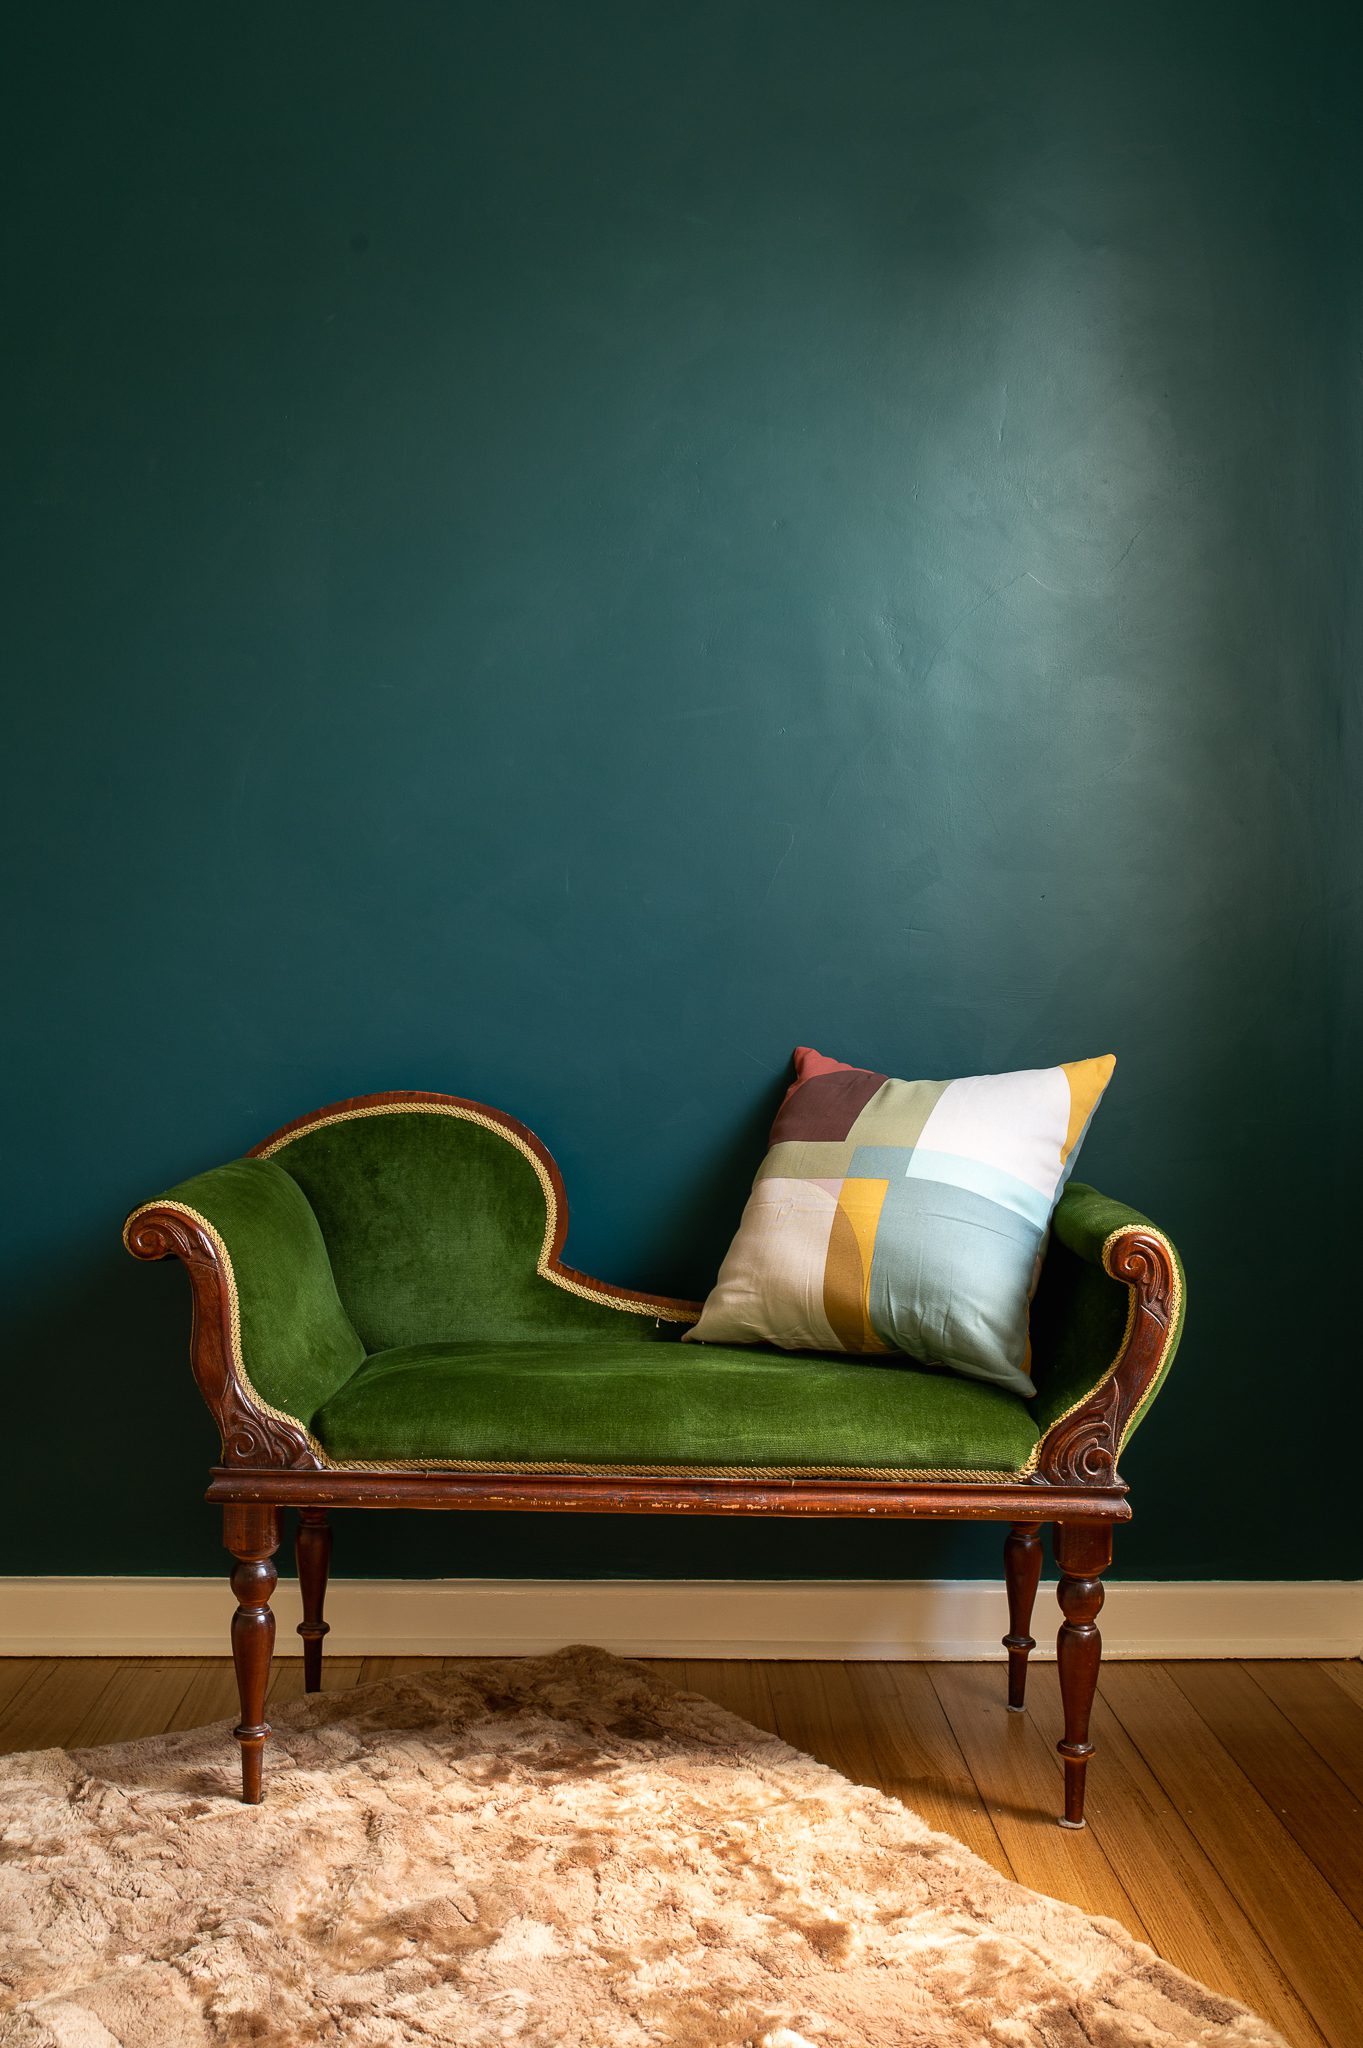 A close up of a vintage Victorian love seat with green velvet upholstery.